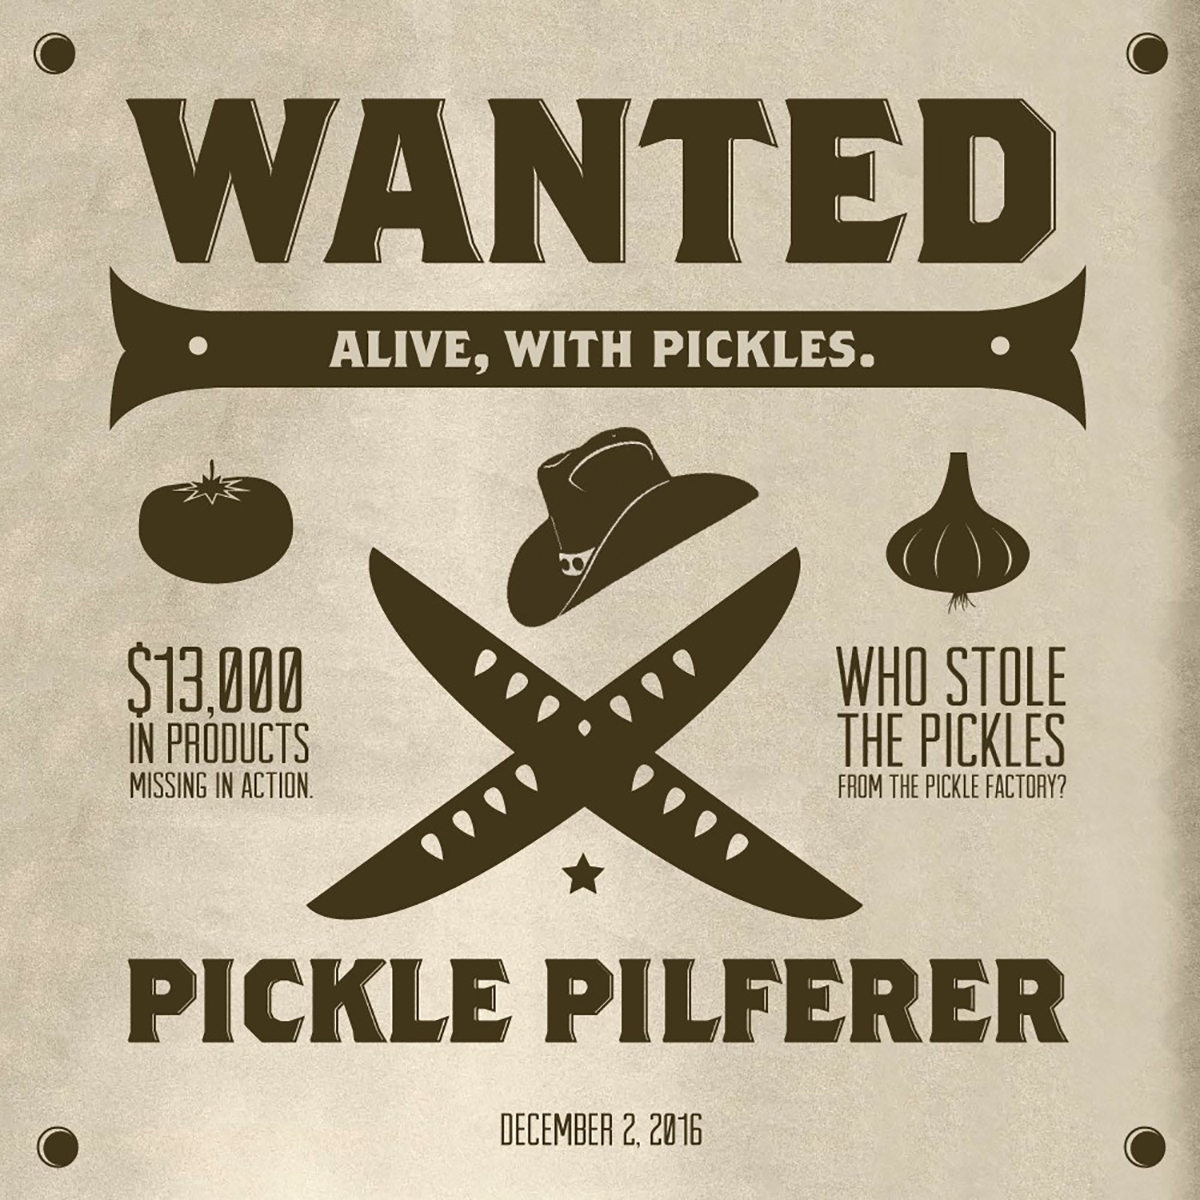 McClure's Pickles Ad 3